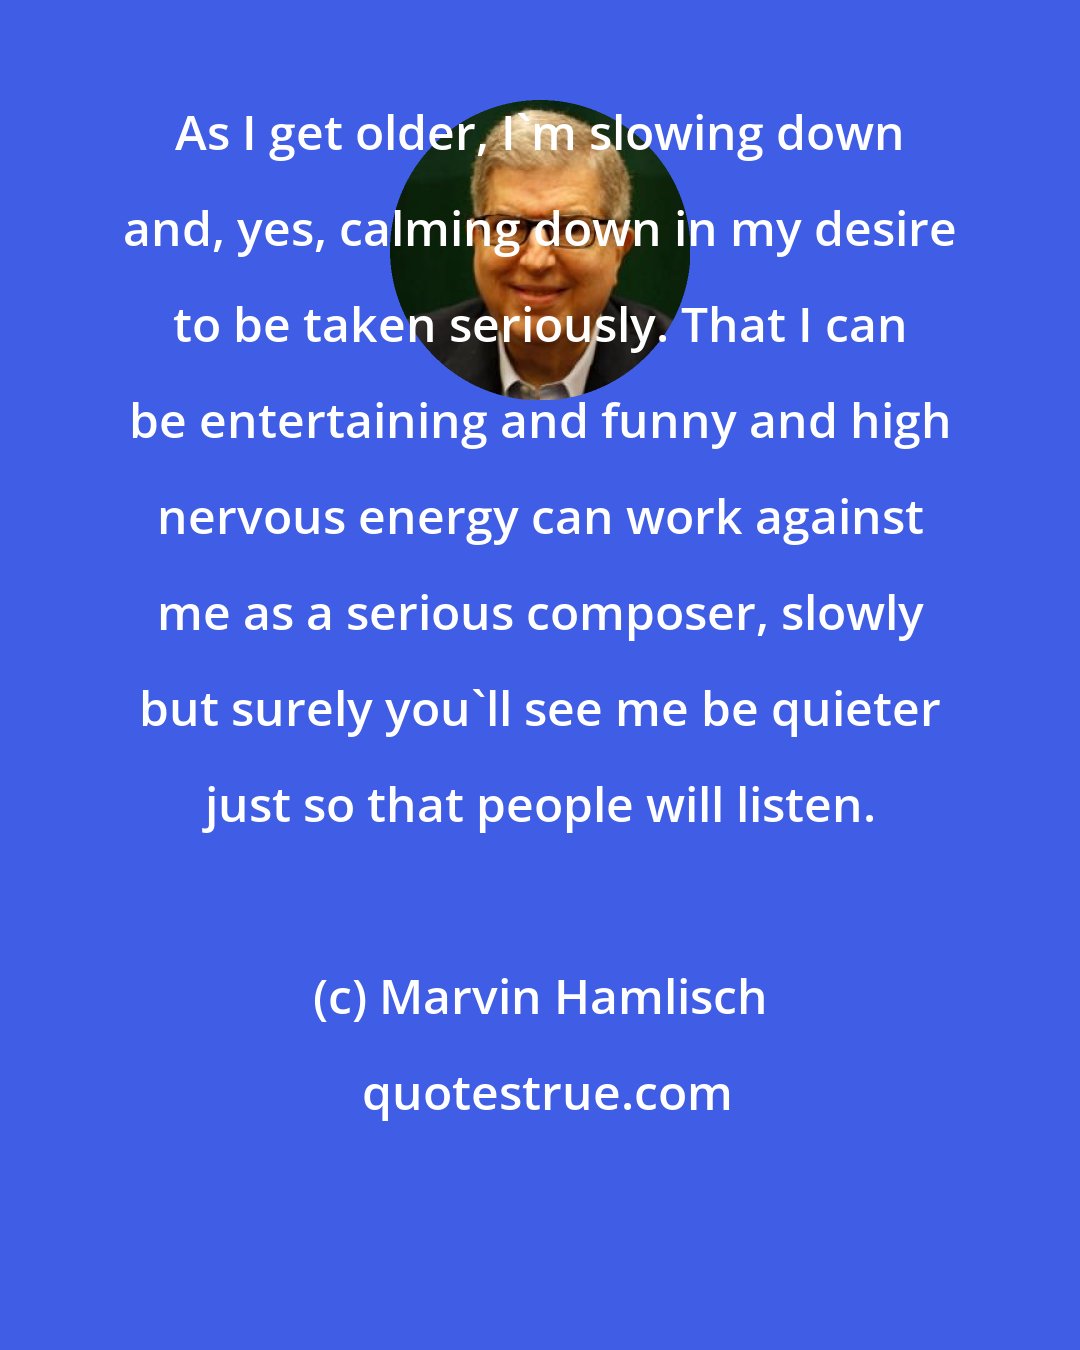 Marvin Hamlisch: As I get older, I'm slowing down and, yes, calming down in my desire to be taken seriously. That I can be entertaining and funny and high nervous energy can work against me as a serious composer, slowly but surely you'll see me be quieter just so that people will listen.